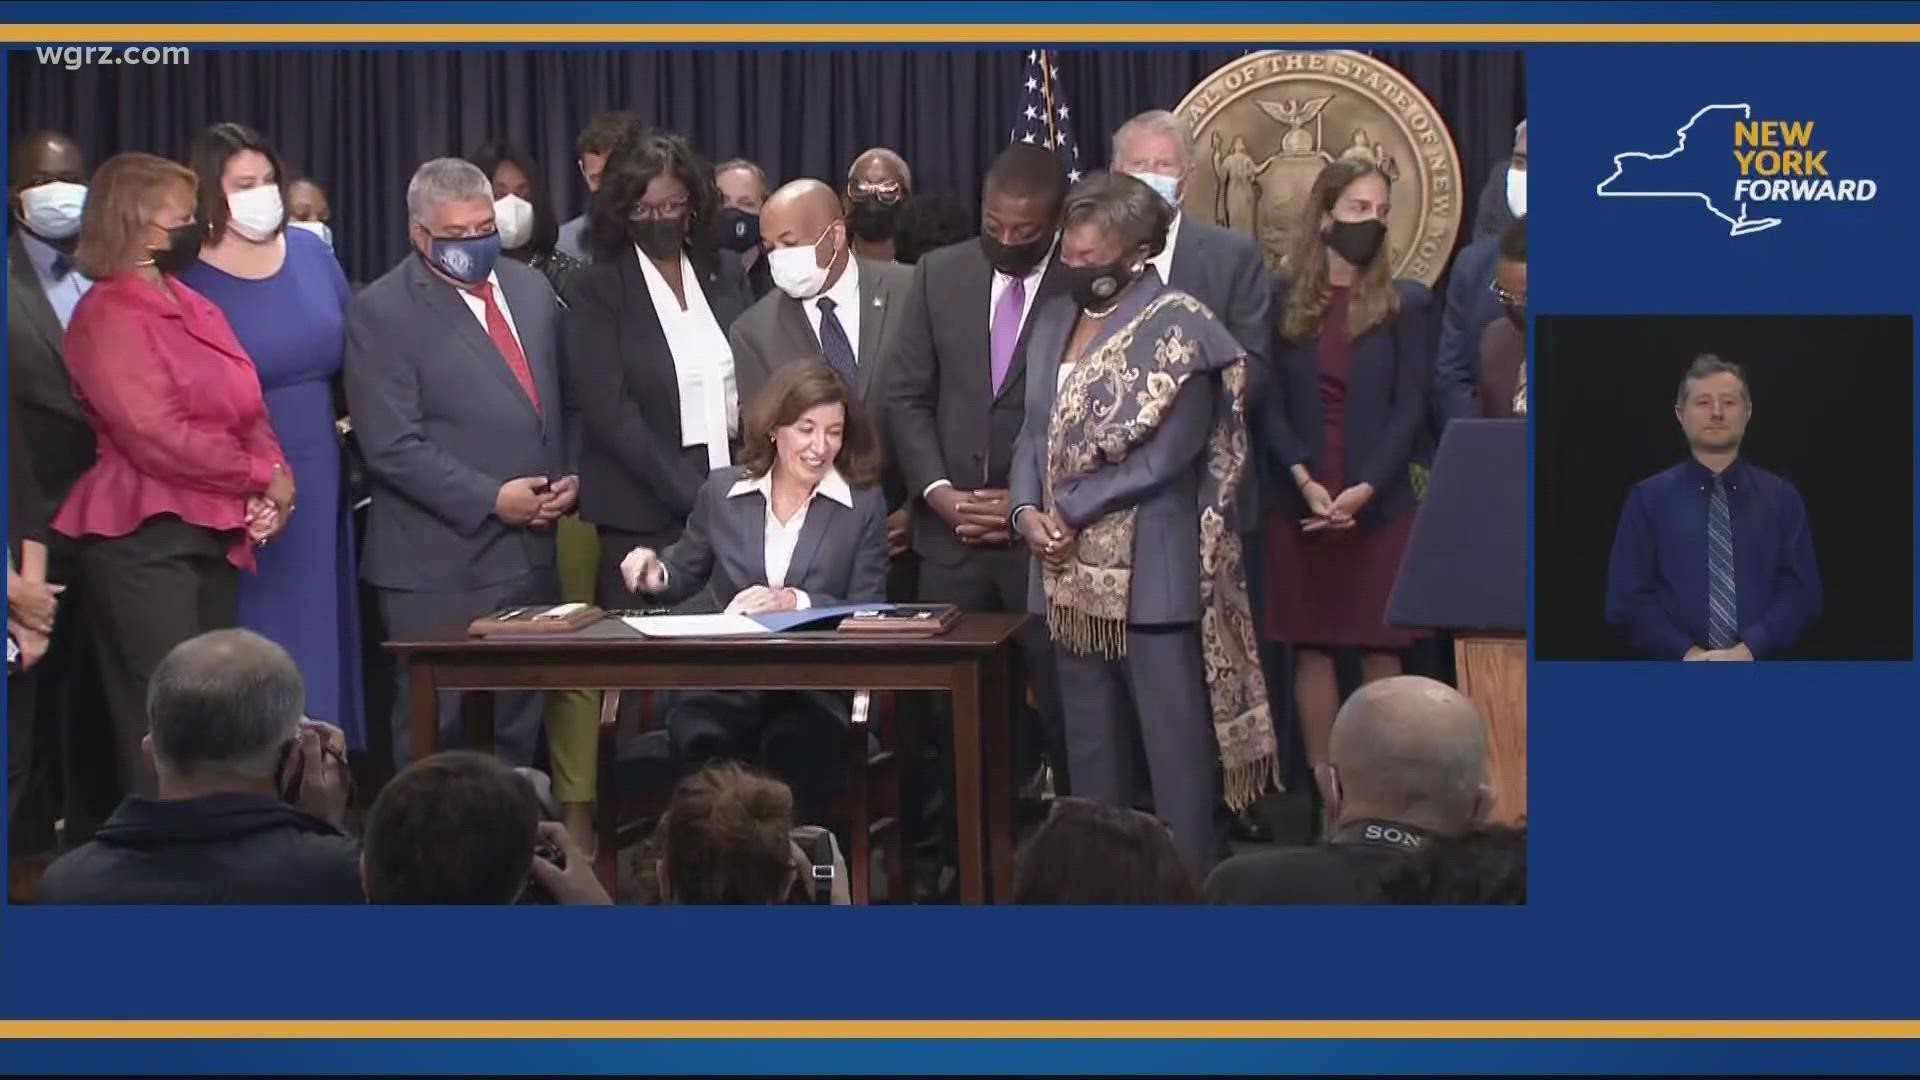 'Less is More' parole reform bill signed today